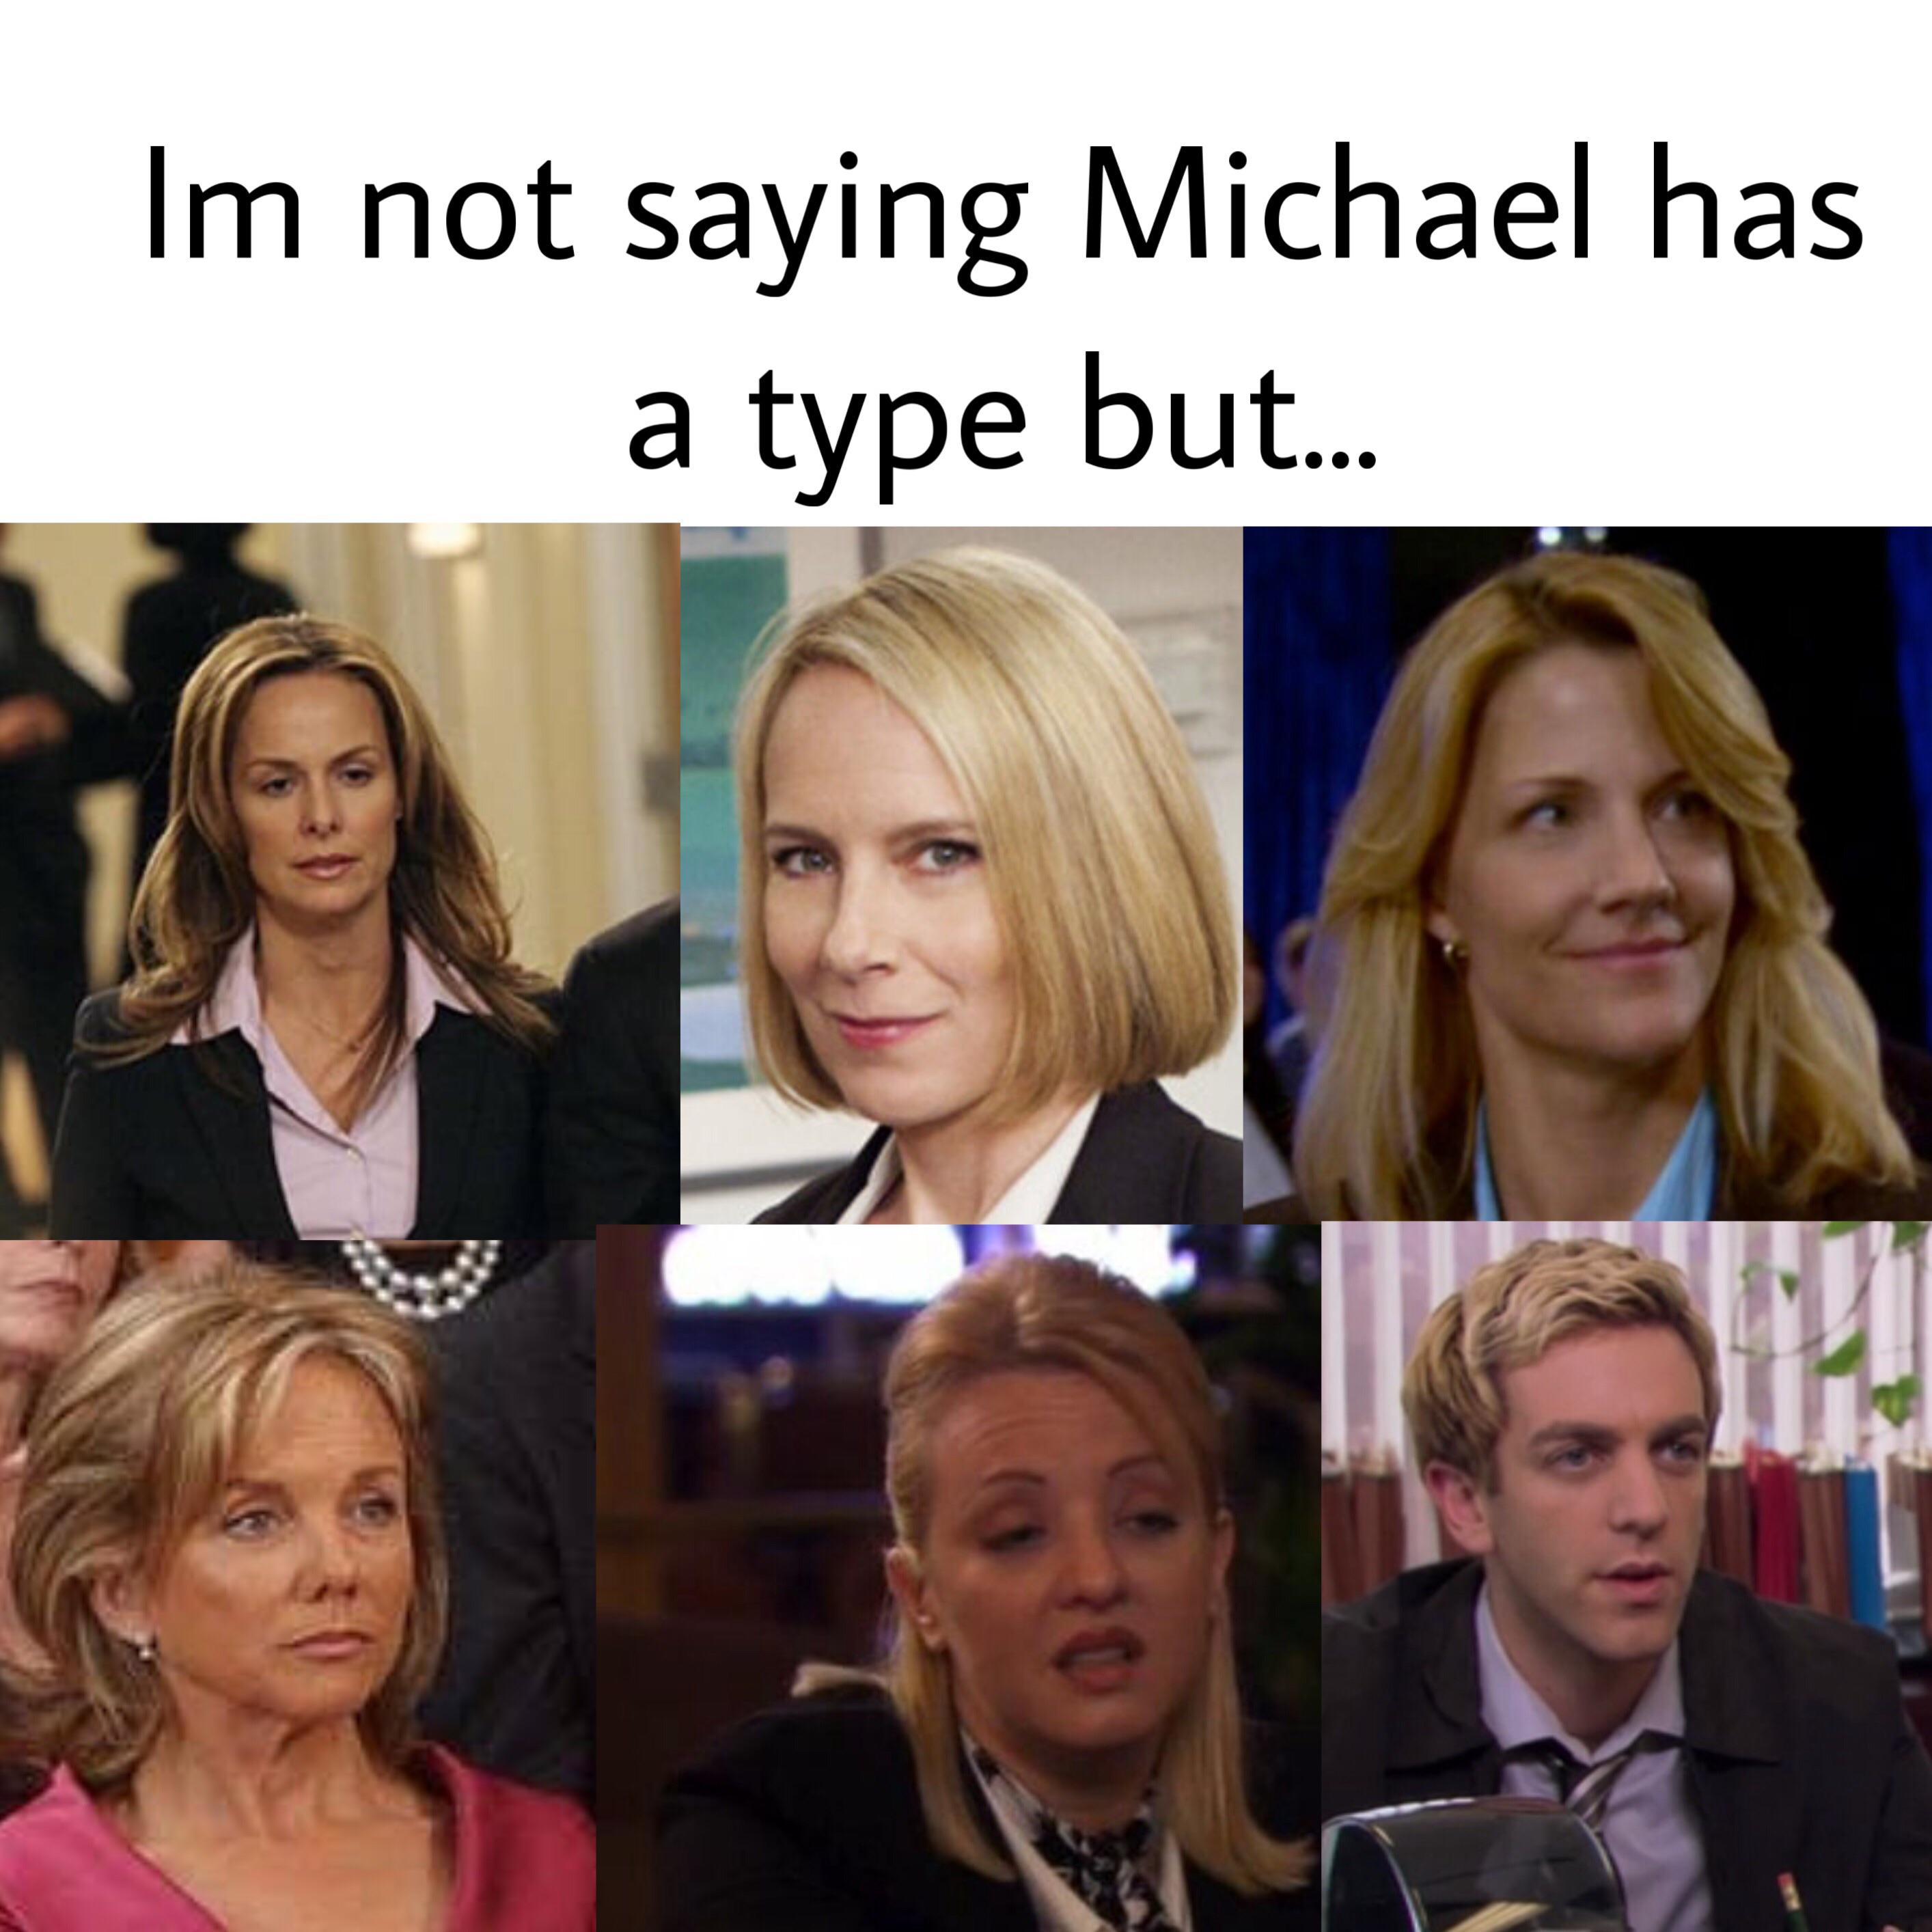 Mike definitely had a type...